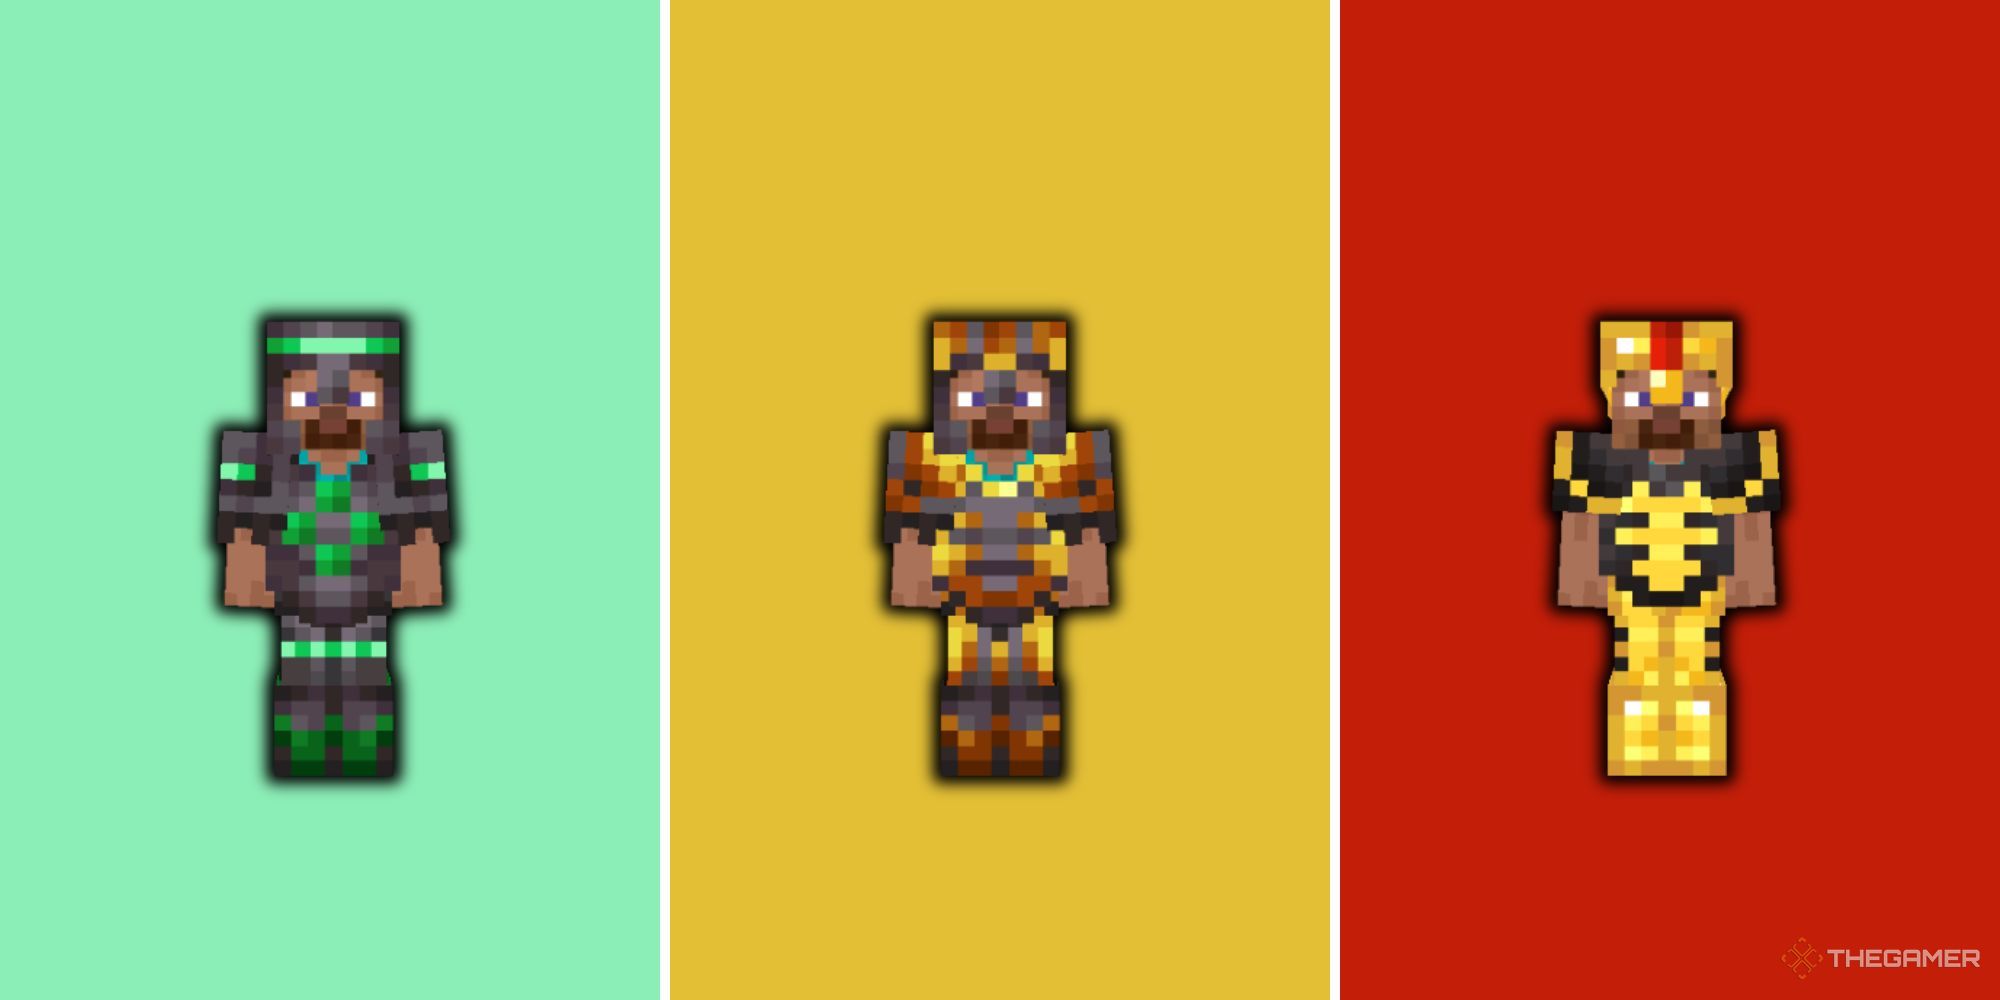 A colorful, split image of various Minecraft player models wearing flashy, contrasting armor with patterns on them.